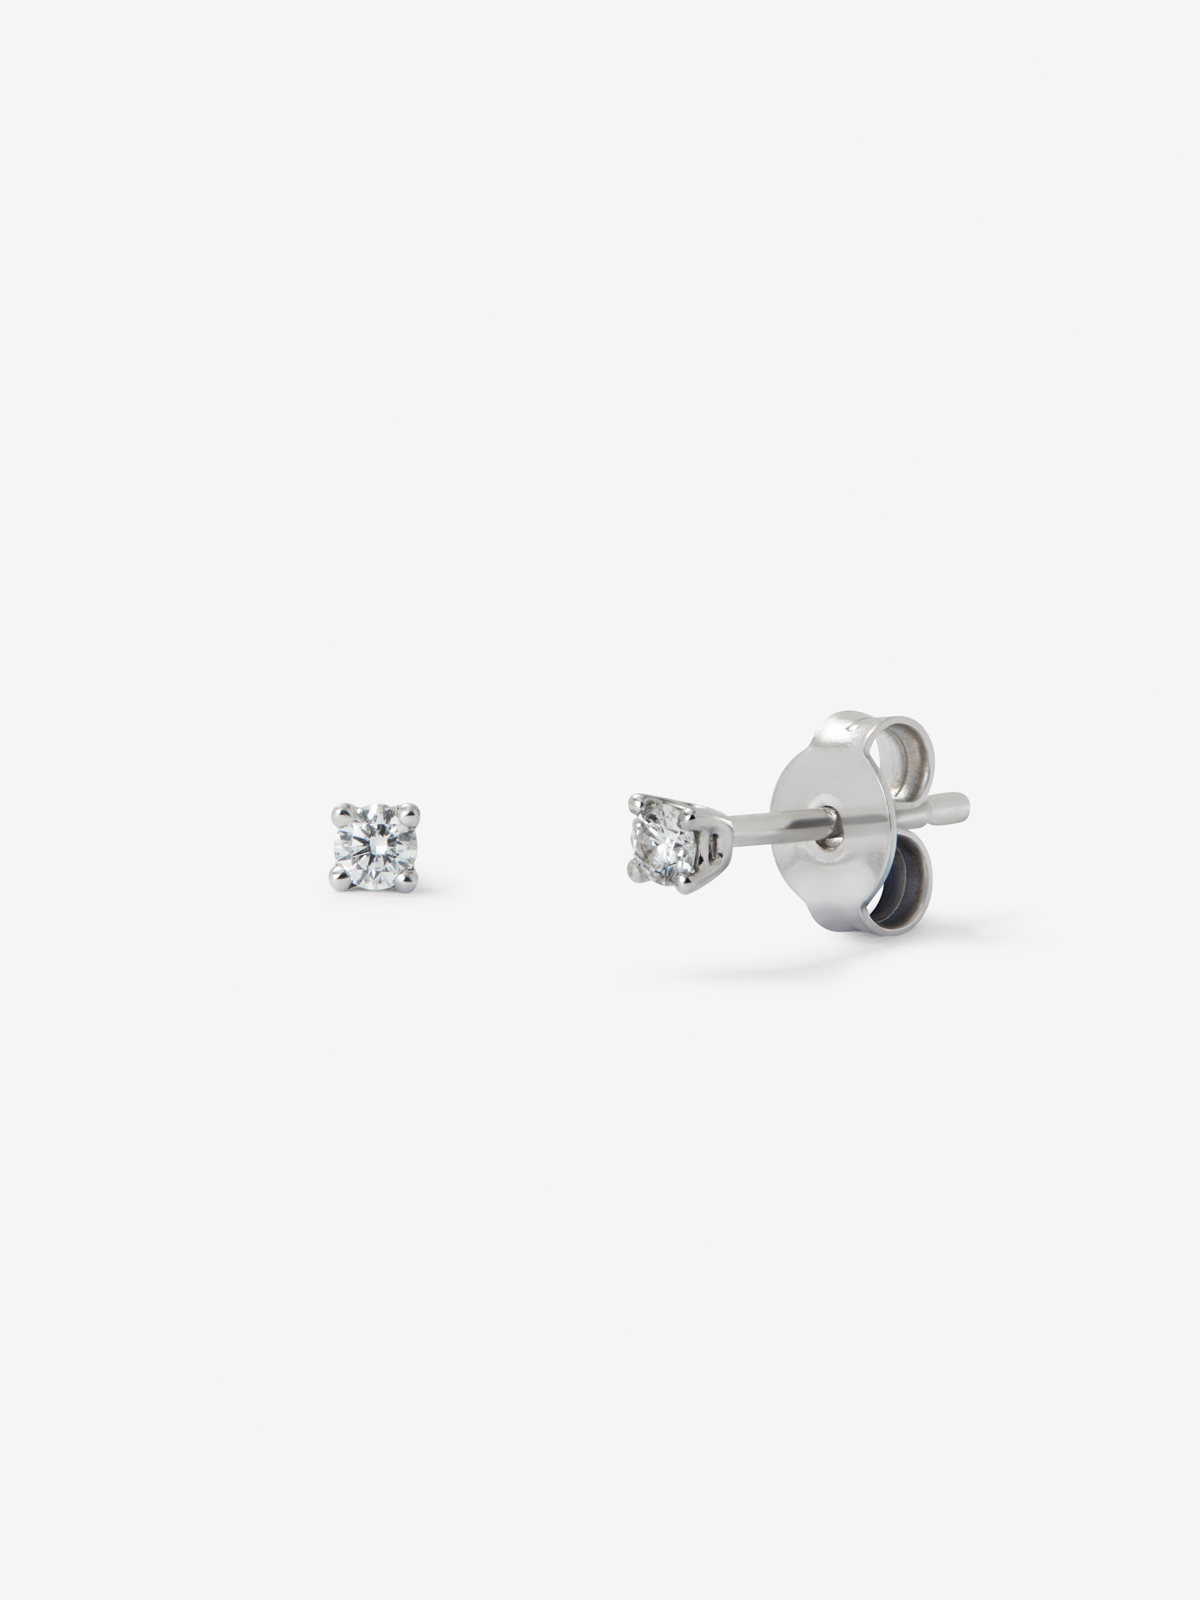 18K white gold earrings with solitary diamond